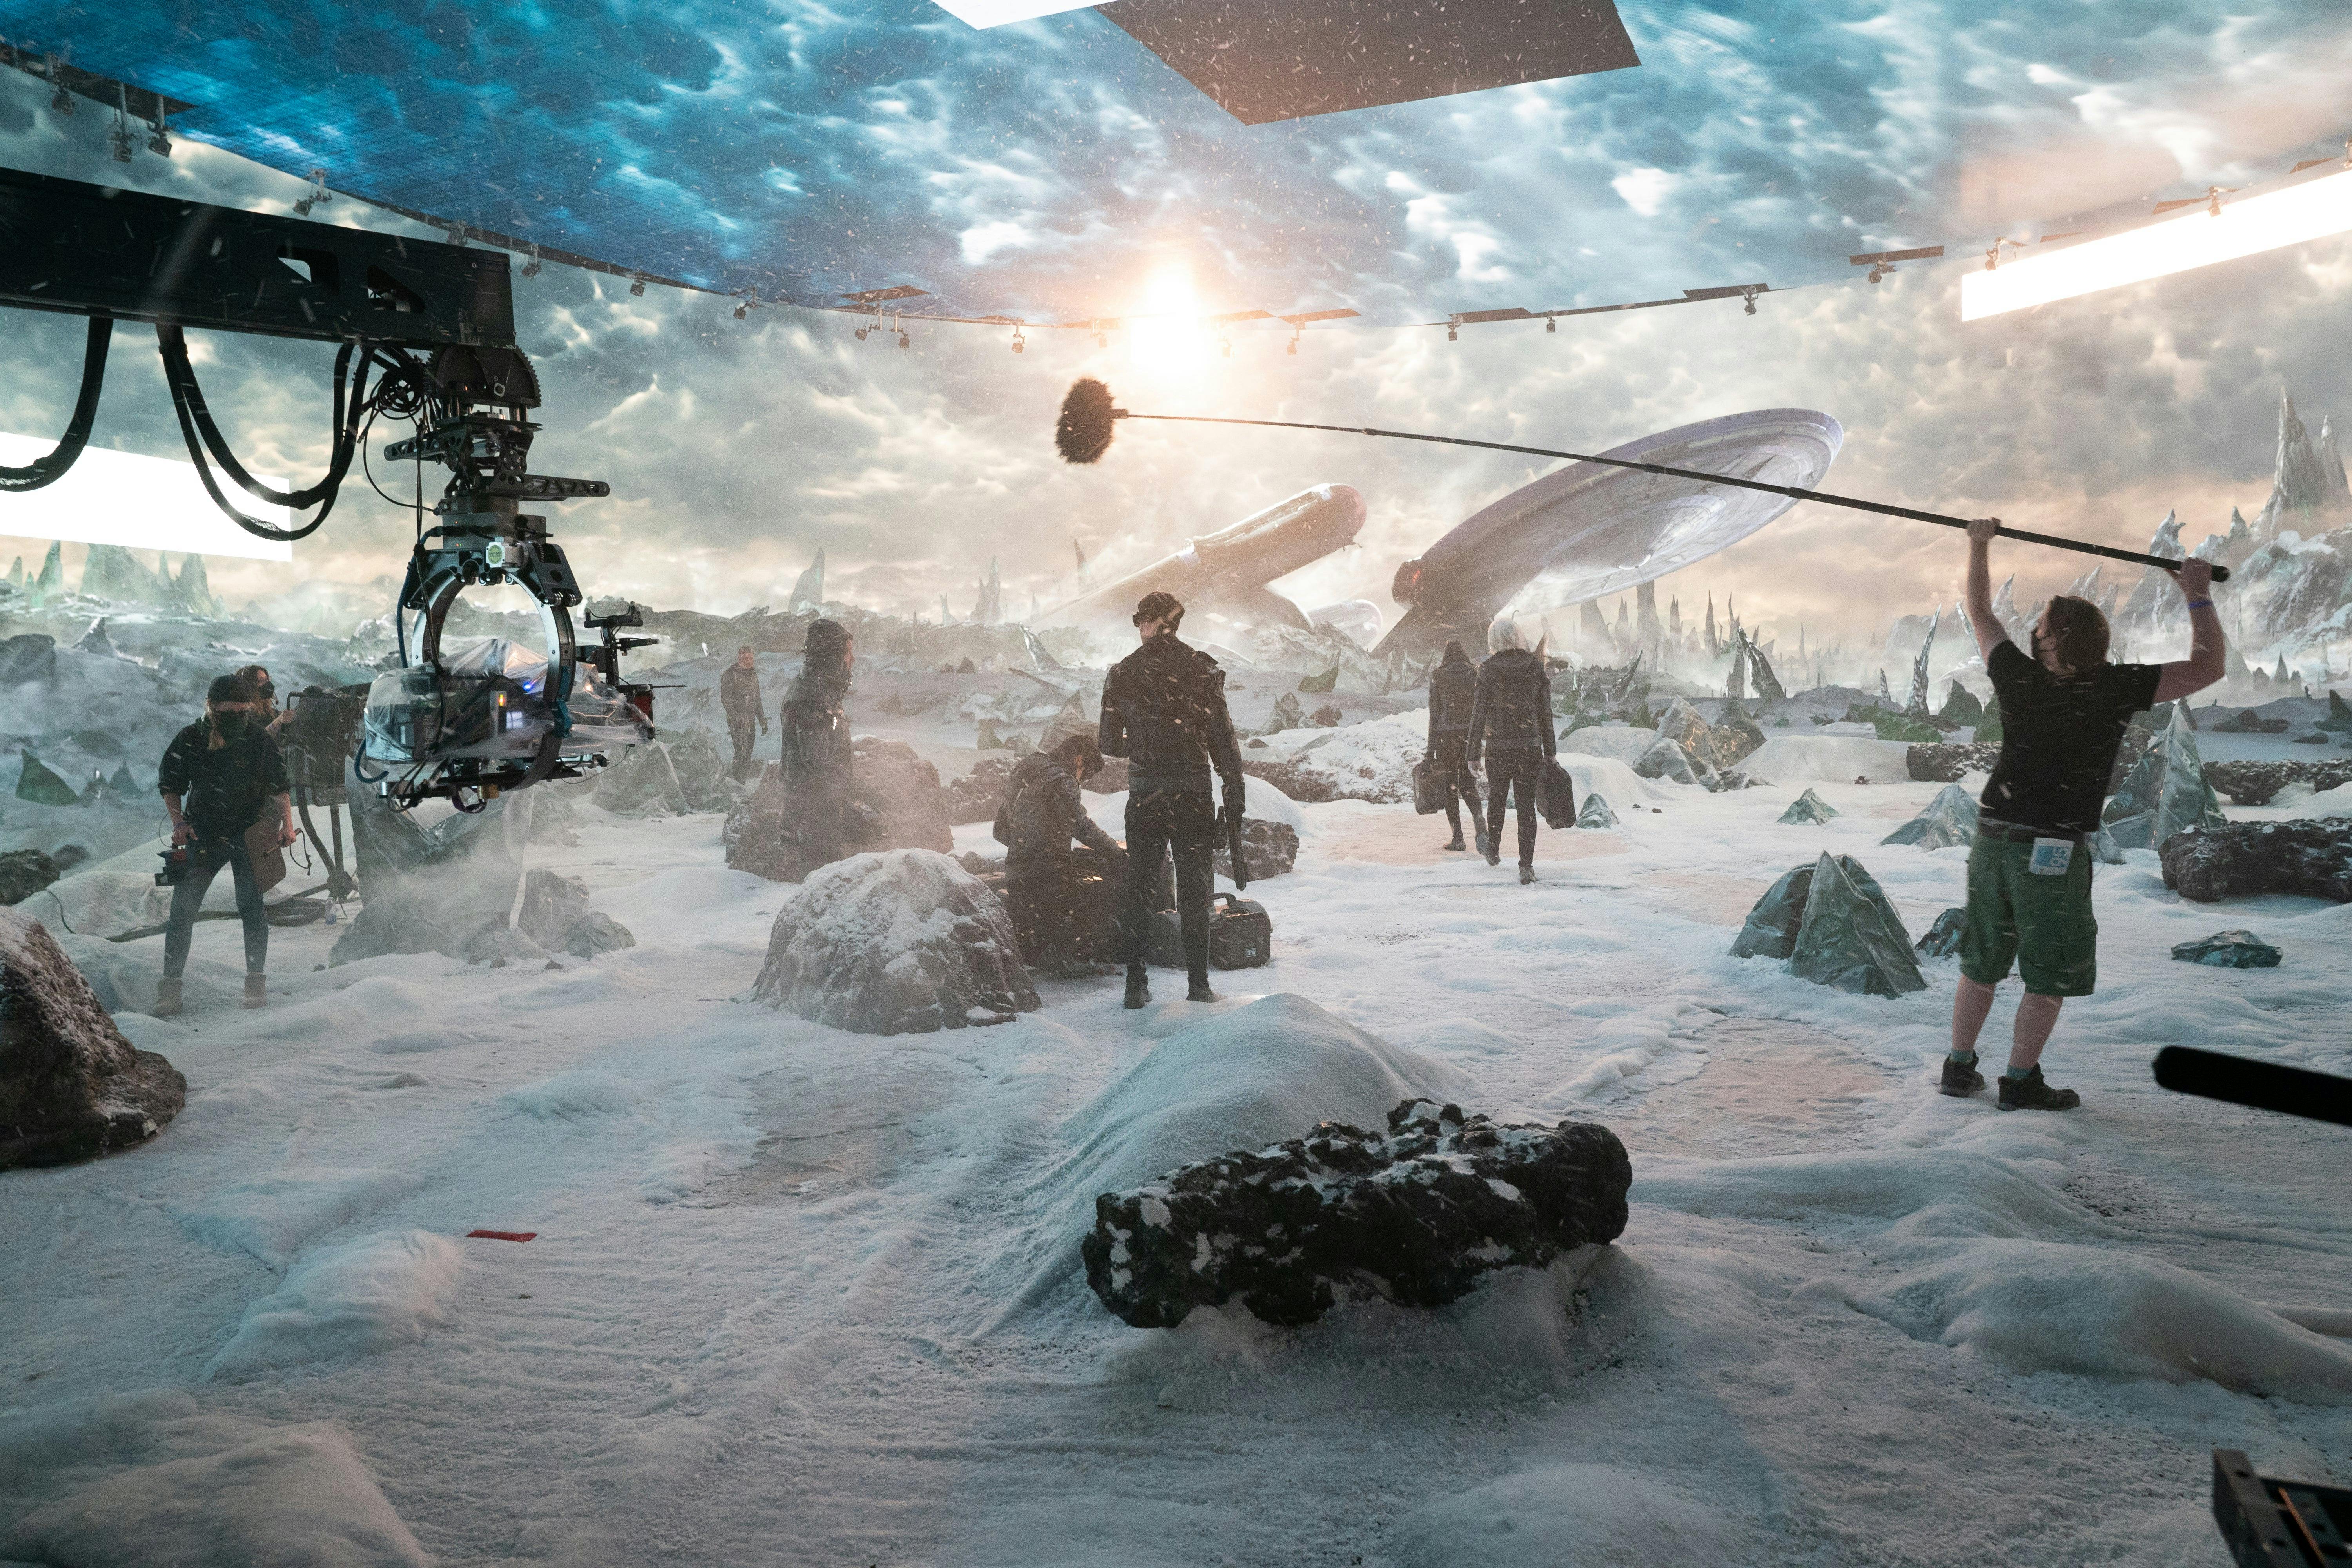 The crew shoots a scene set on a barren ice planet.